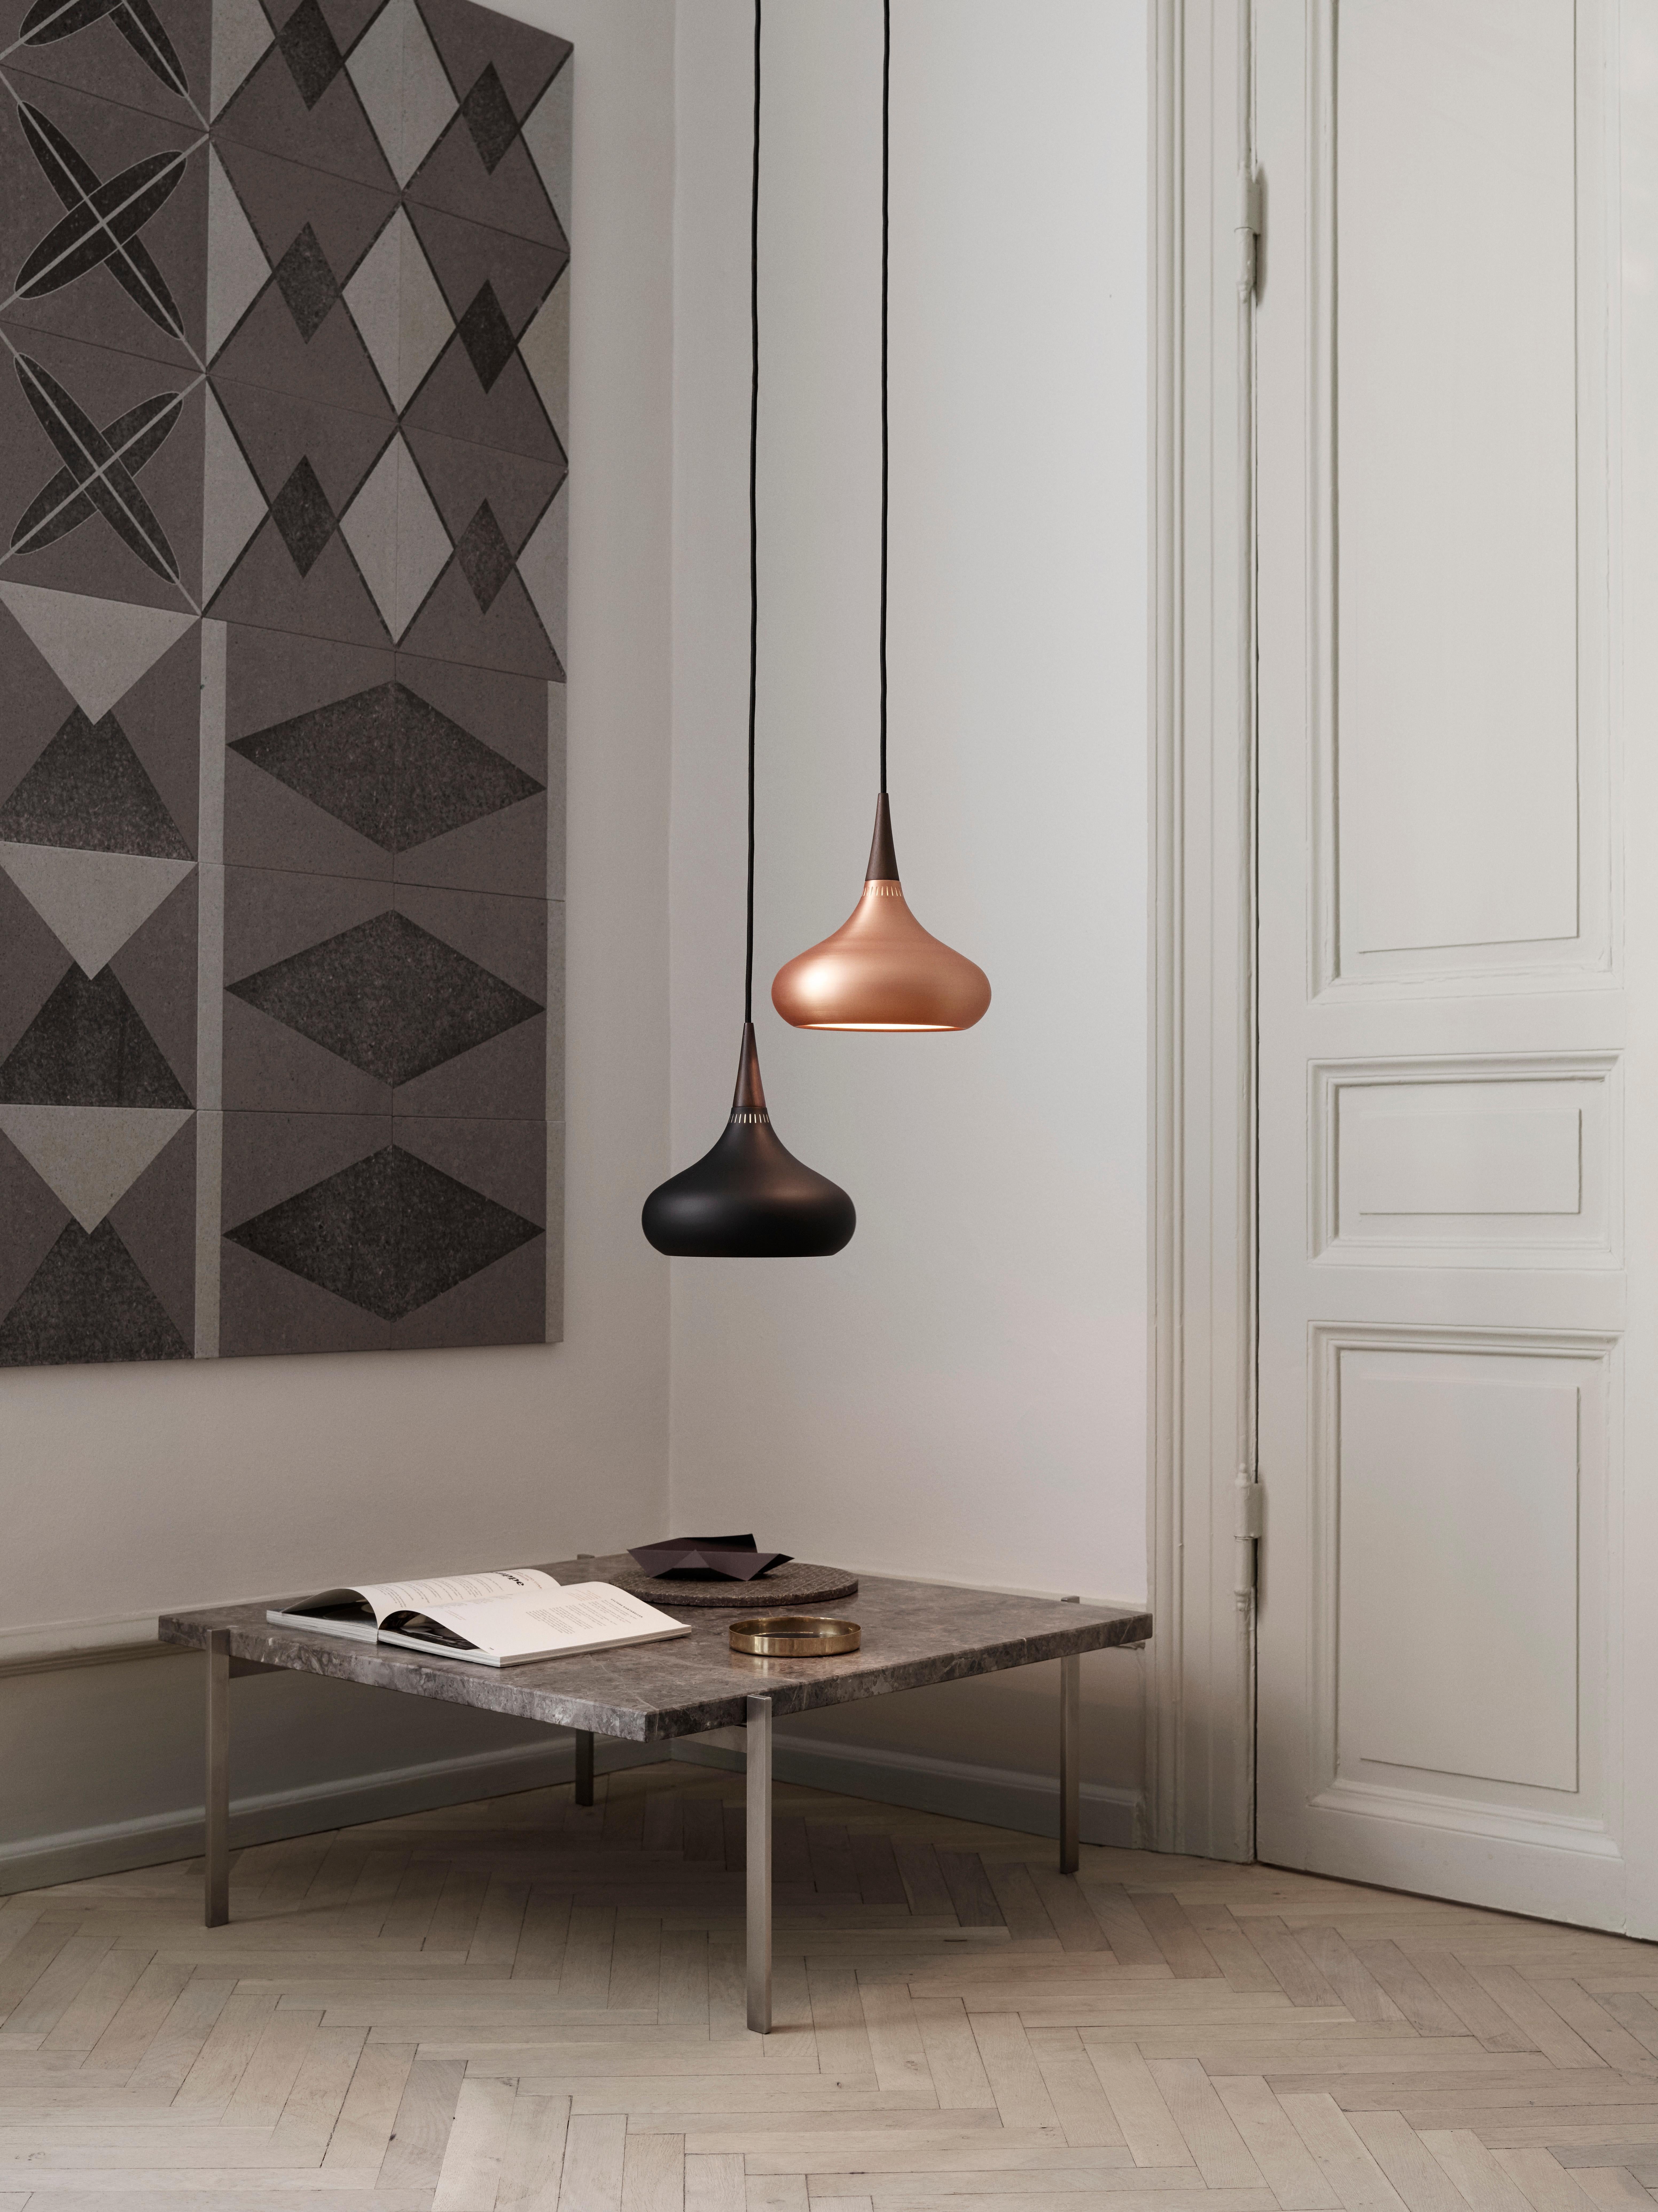 Jo Hammerborg 'Orient' Pendant Lamp for Fritz Hansen in Black and Rosewood.

Established in 1872, Fritz Hansen has become synonymous with legendary Danish design. Combining timeless craftsmanship with an emphasis on sustainability, the brand’s